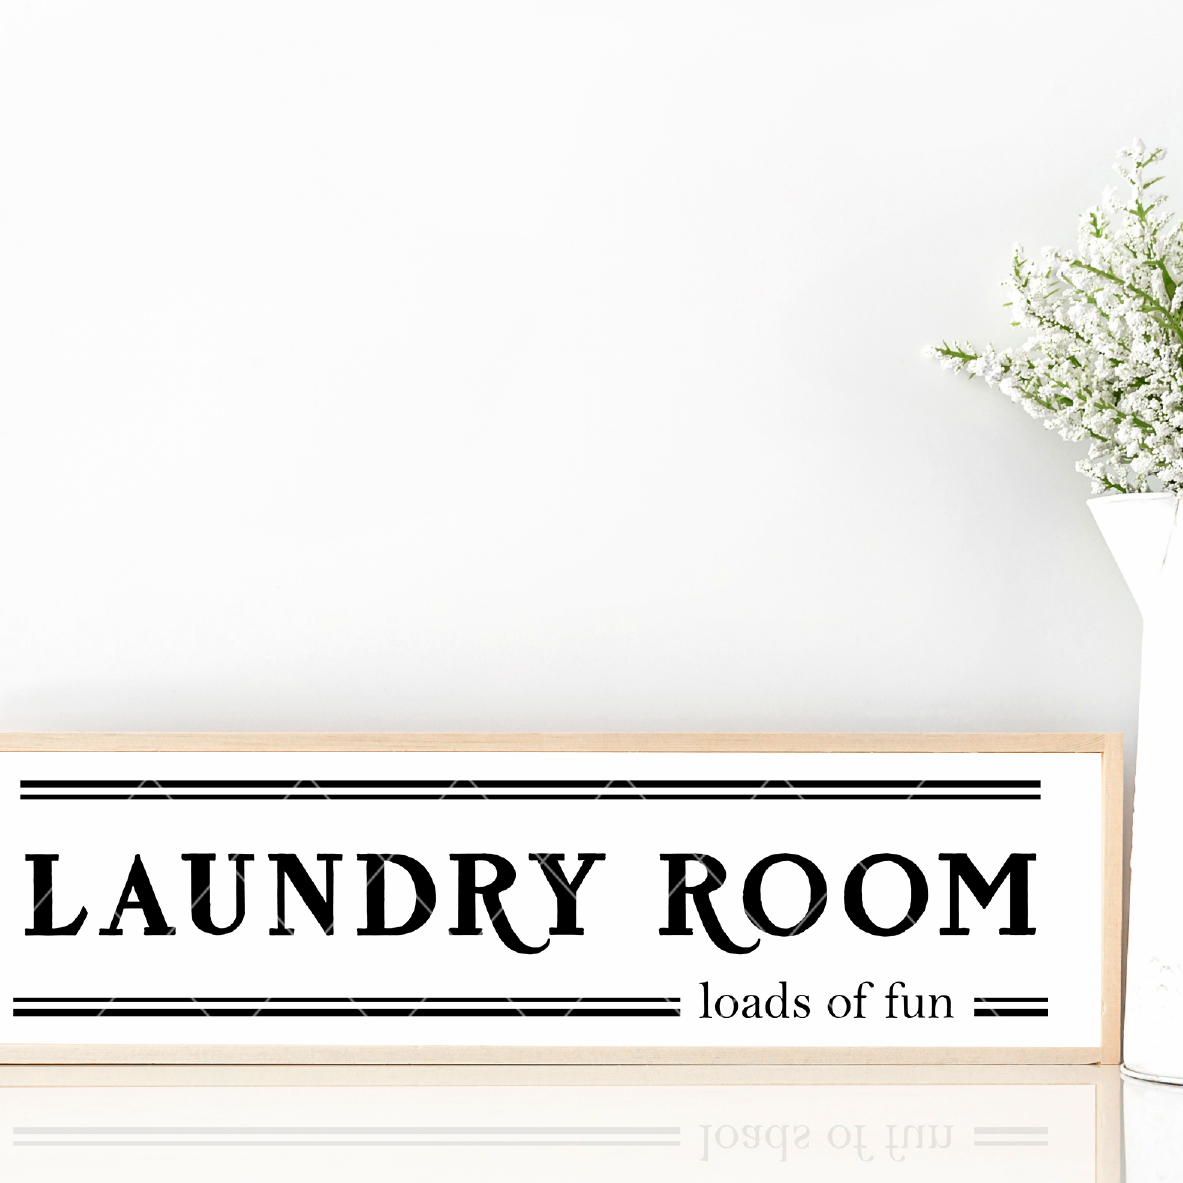 Laundry Room SVG File for Cricut/Silhouette (Style 2) - Commercial Use SVG Files for Cricut & Silhouette